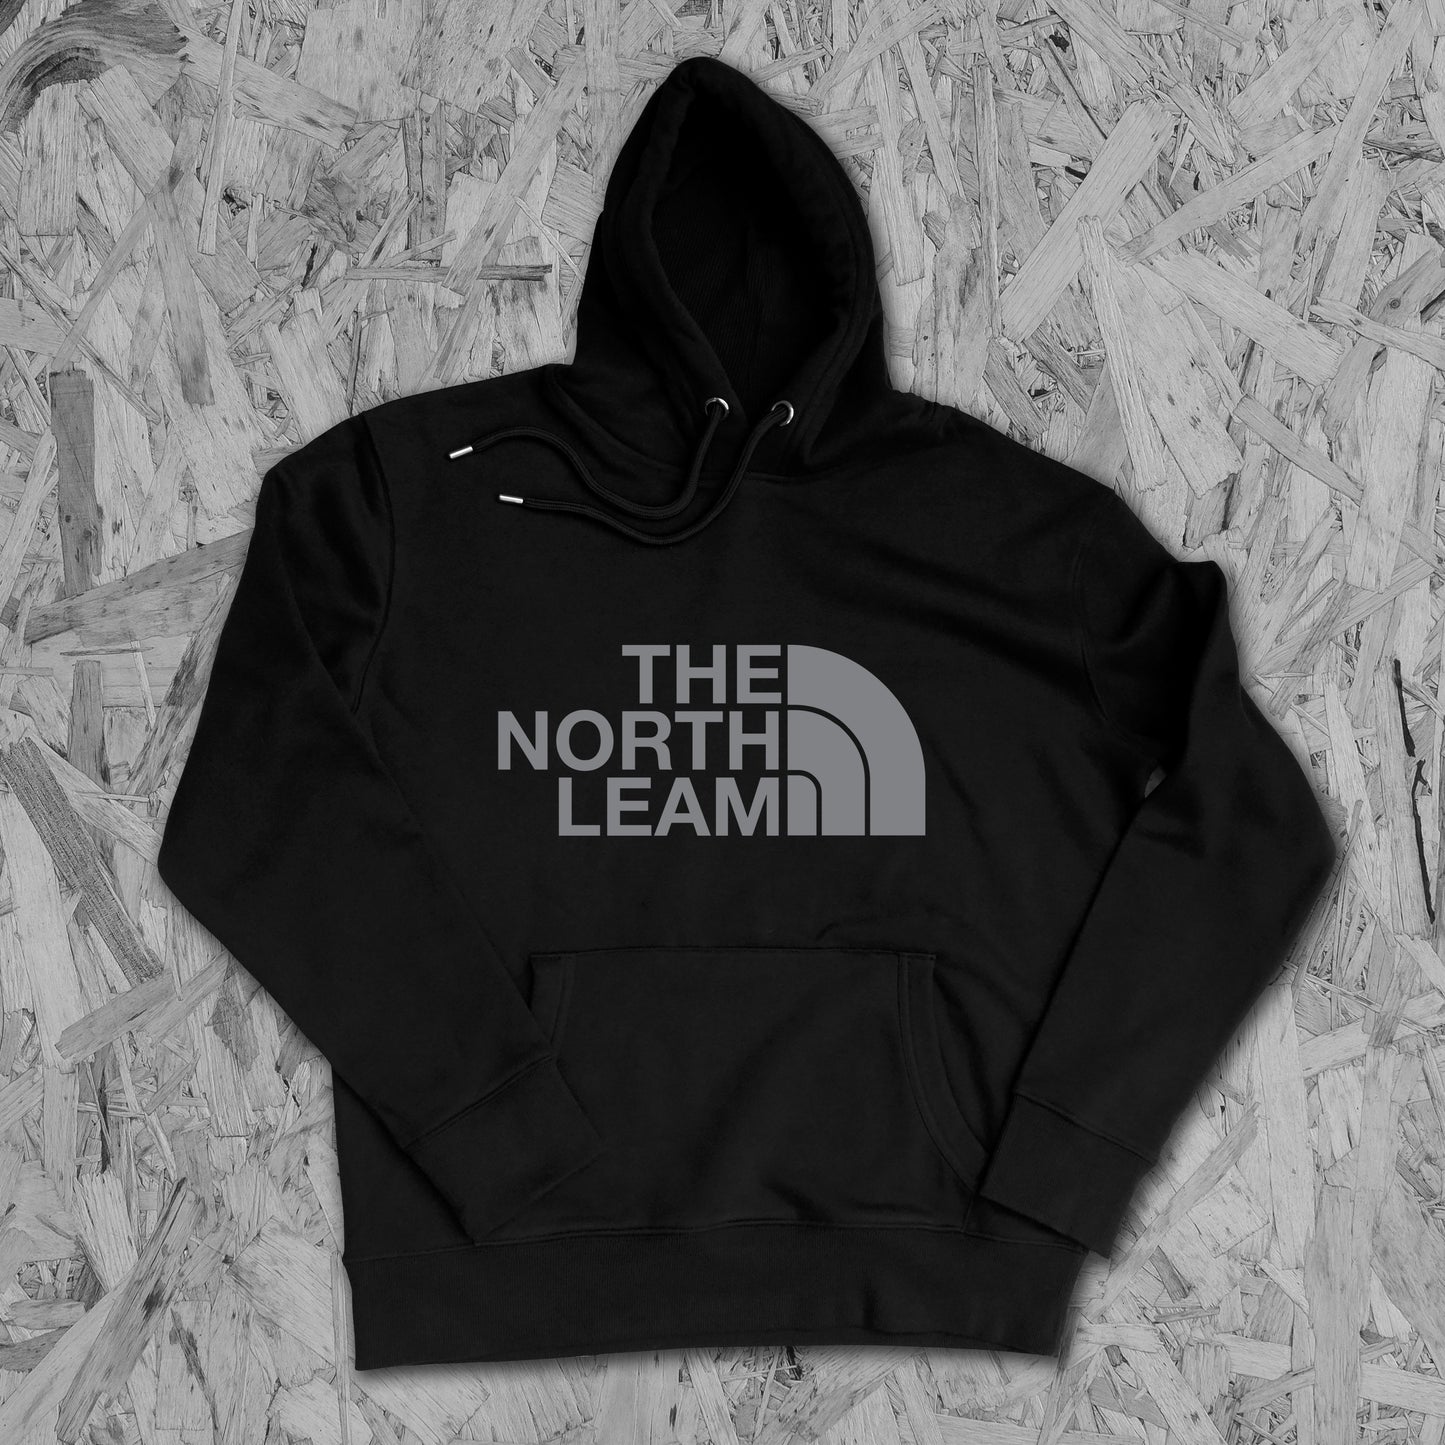 The North Leam Hoodie